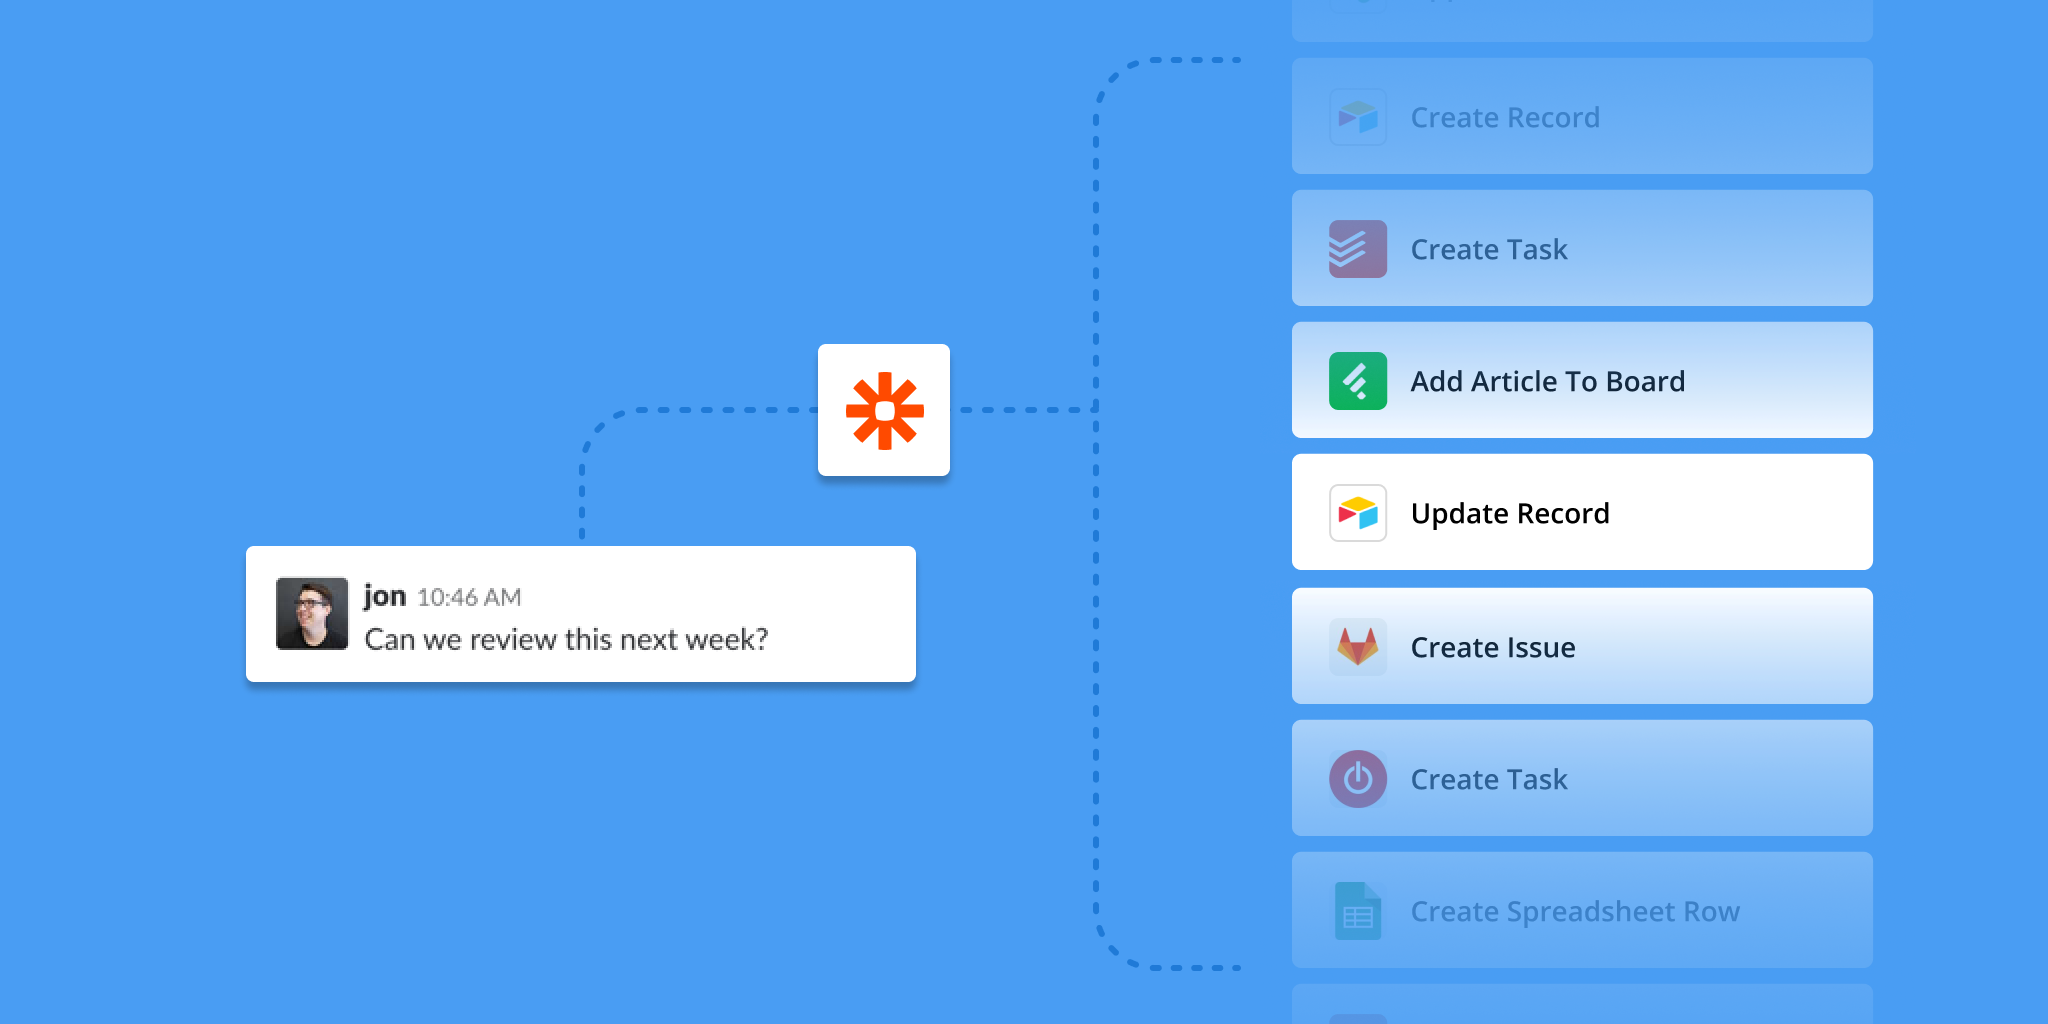 airtable and zapier for crud